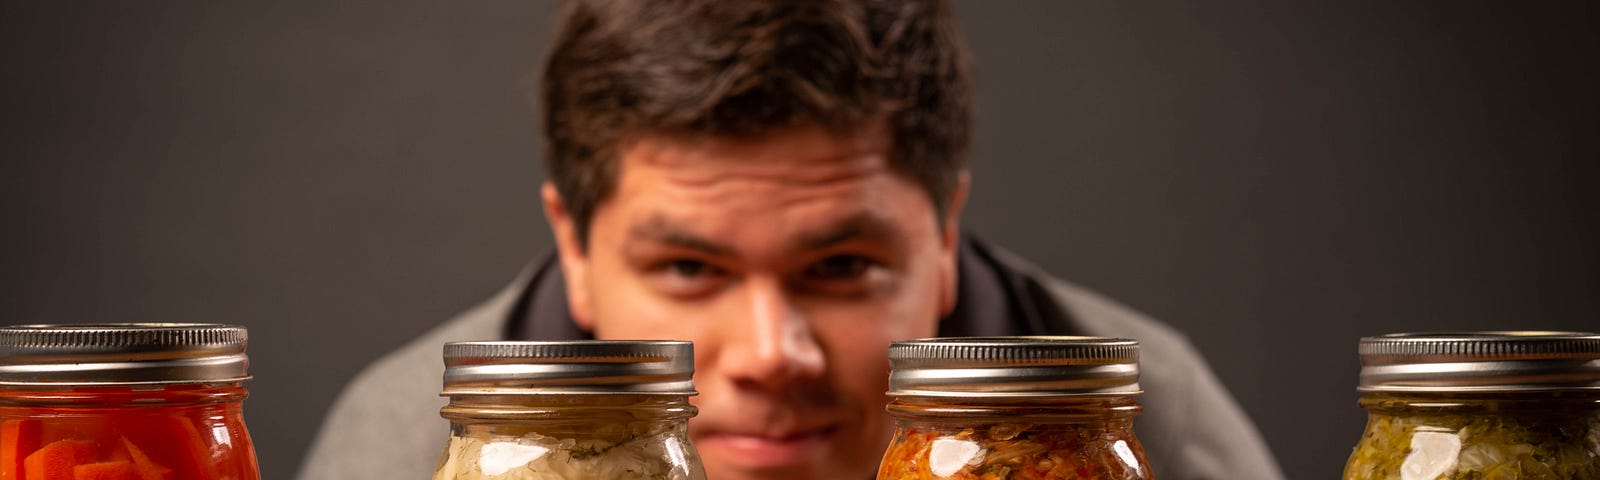 A man scrutinizing several jars of preserved food.